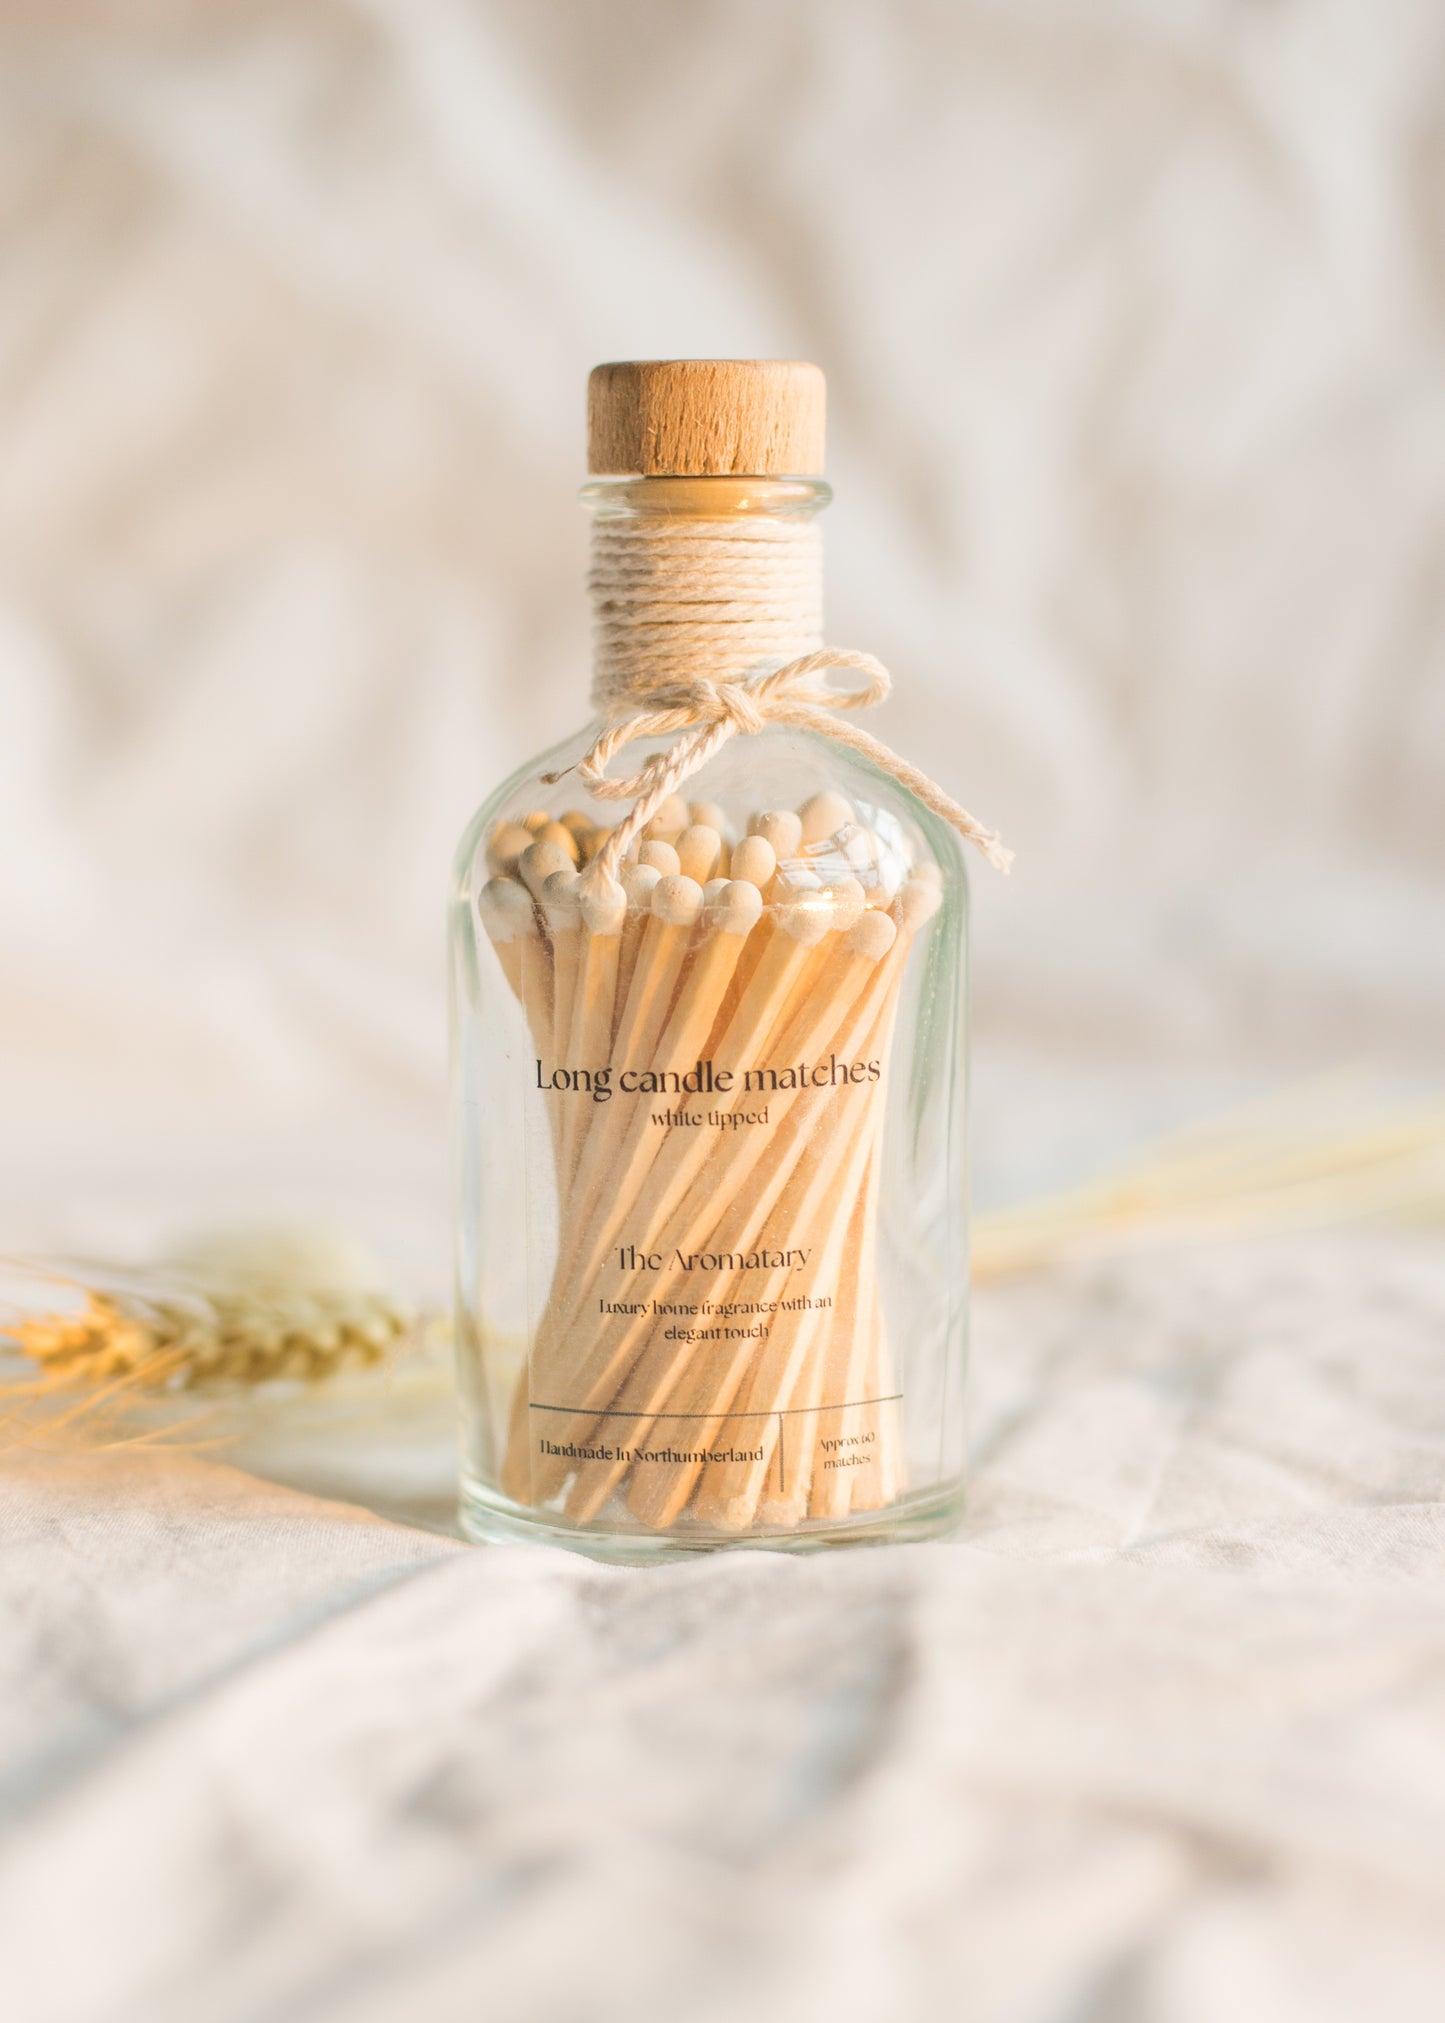 Jar of luxury candle matches - The Aromatary